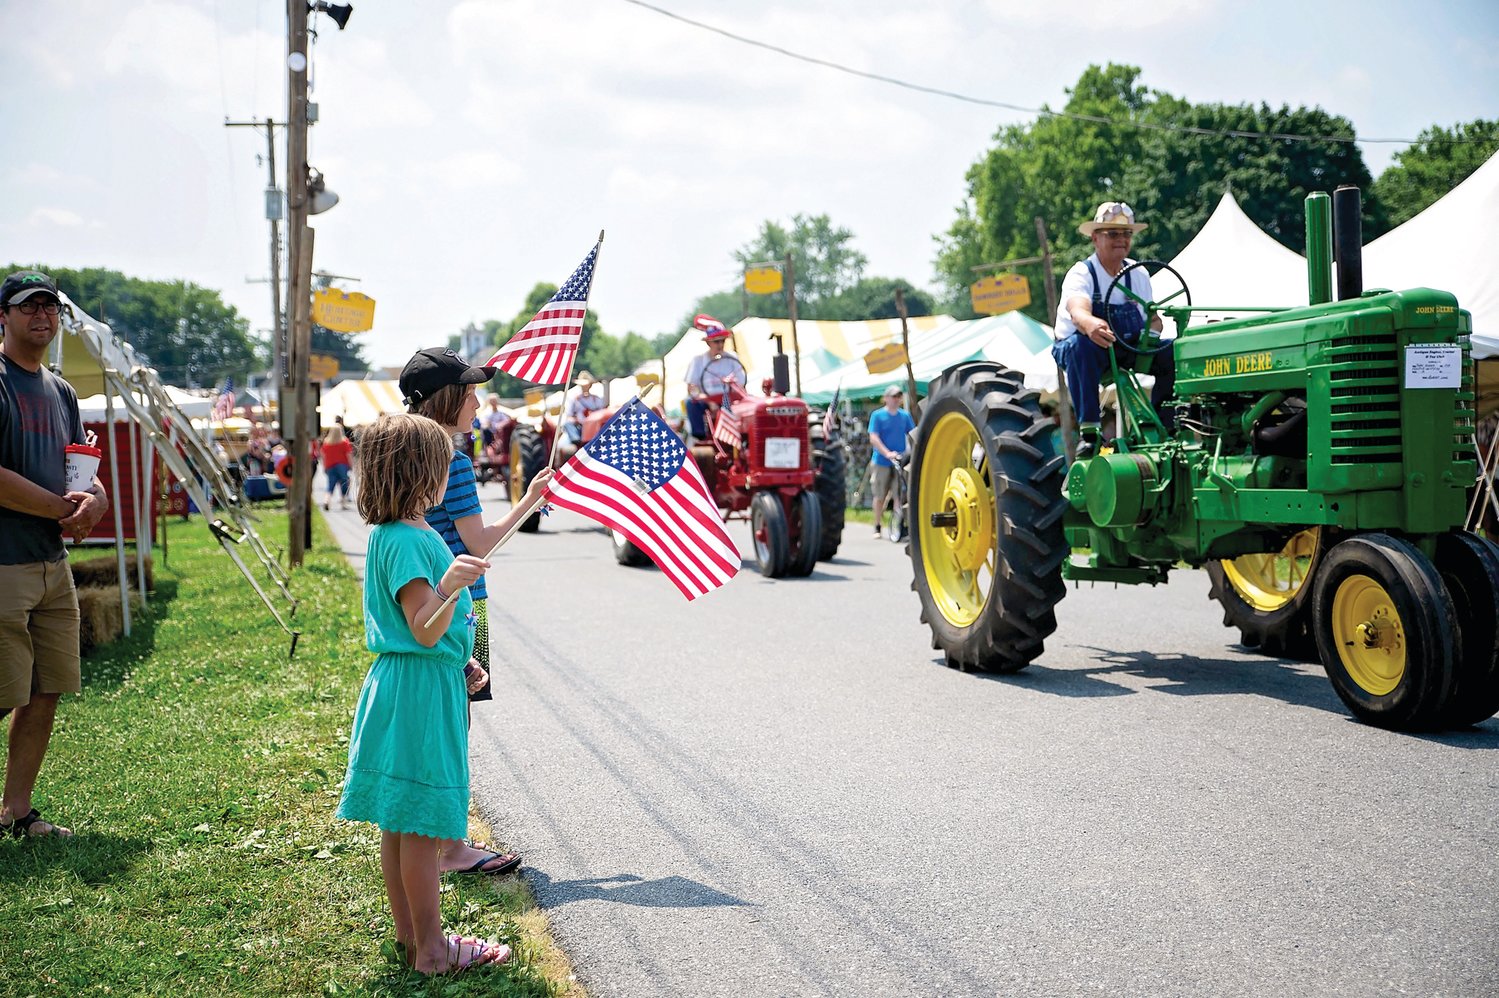 Children watch the tractors go by at the Kutztown Folk Festival.